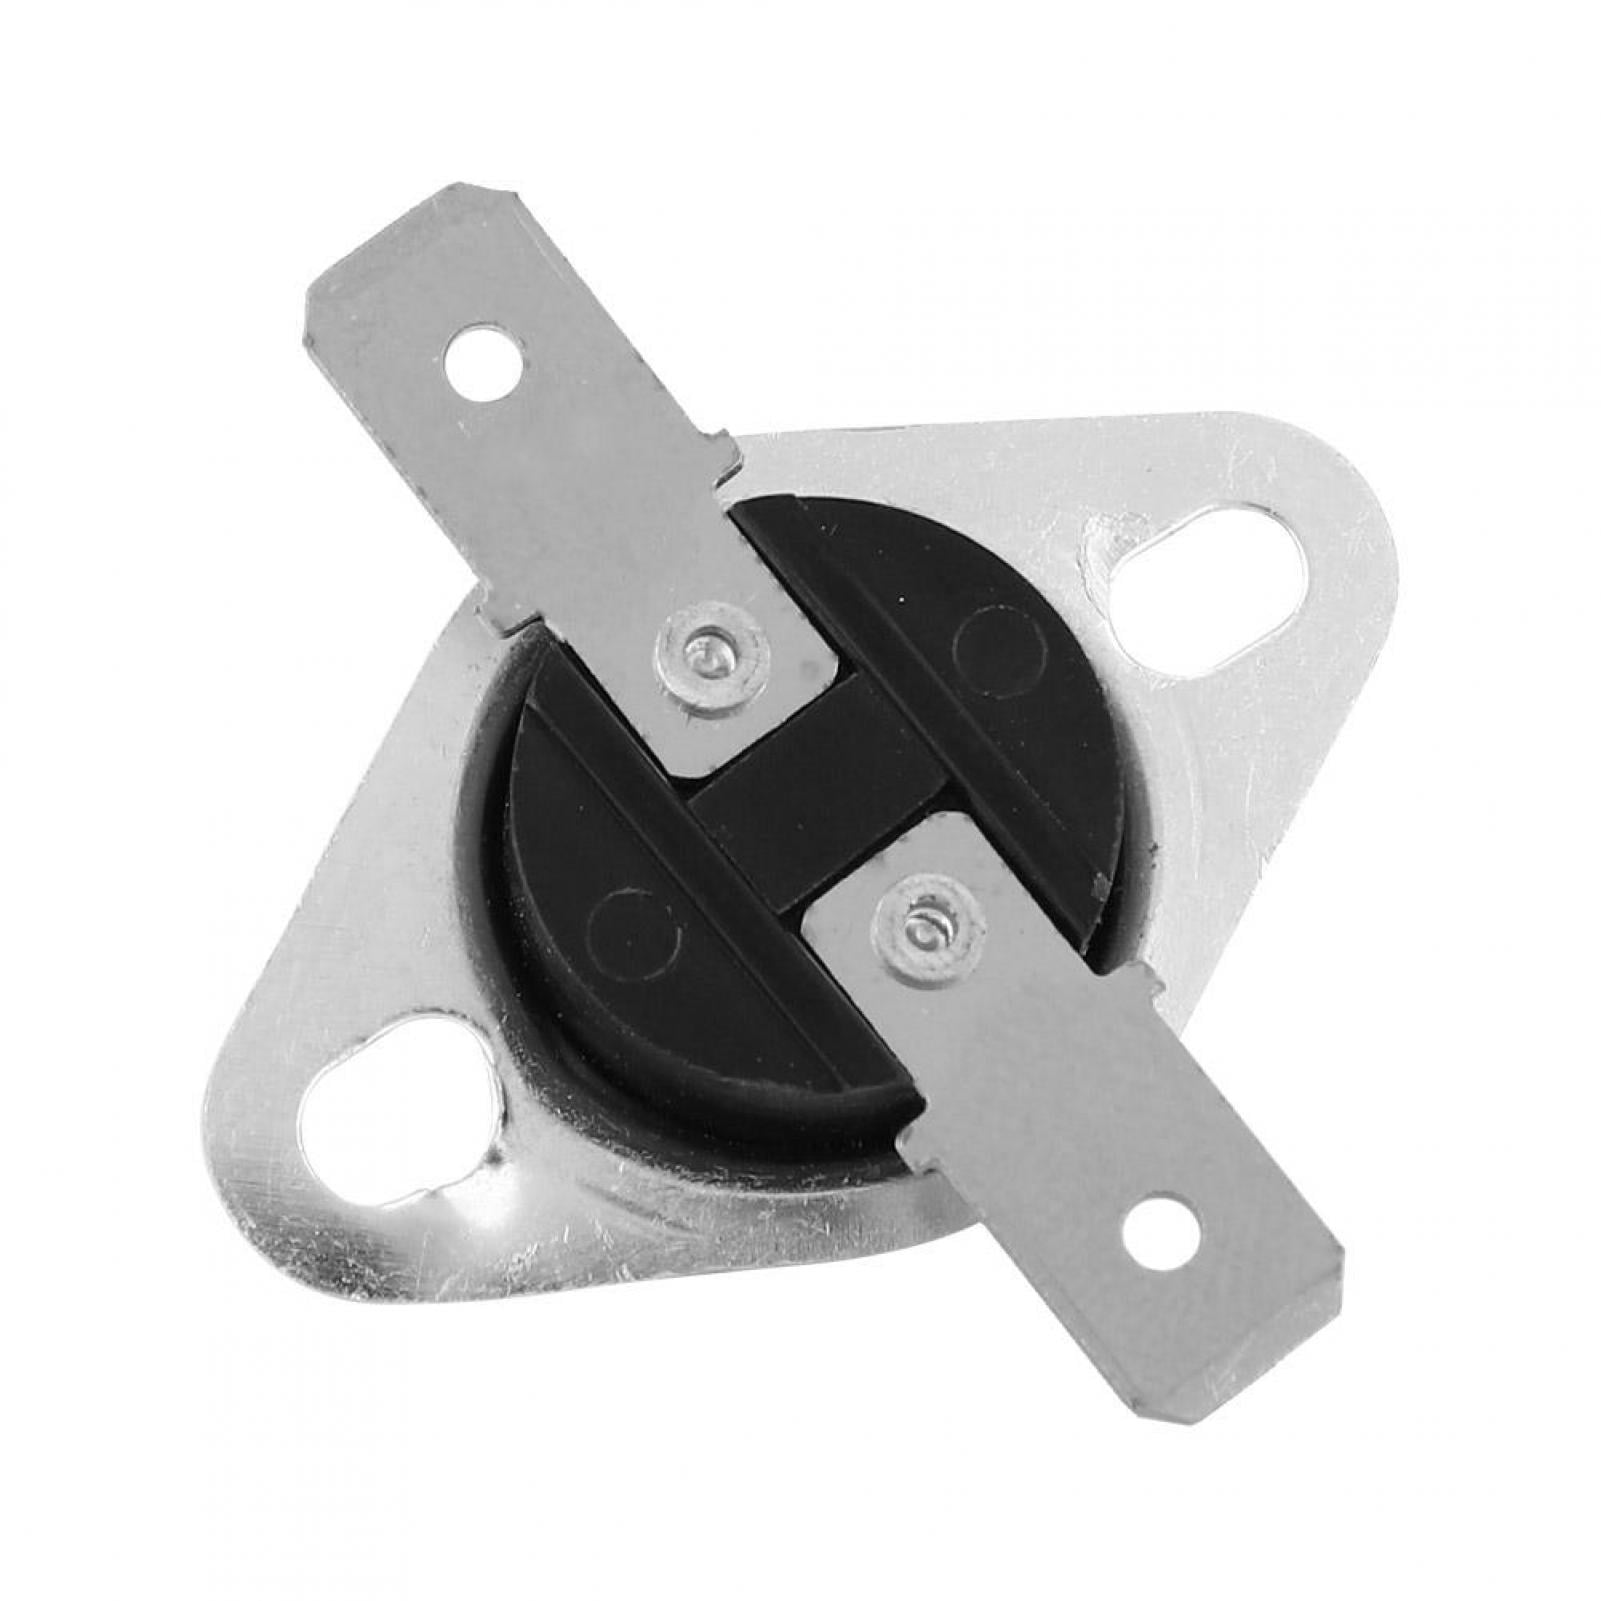 5Pcs Thermostat Switch KSD301 250 V 15 A normal controlswitch 120 ℃ 